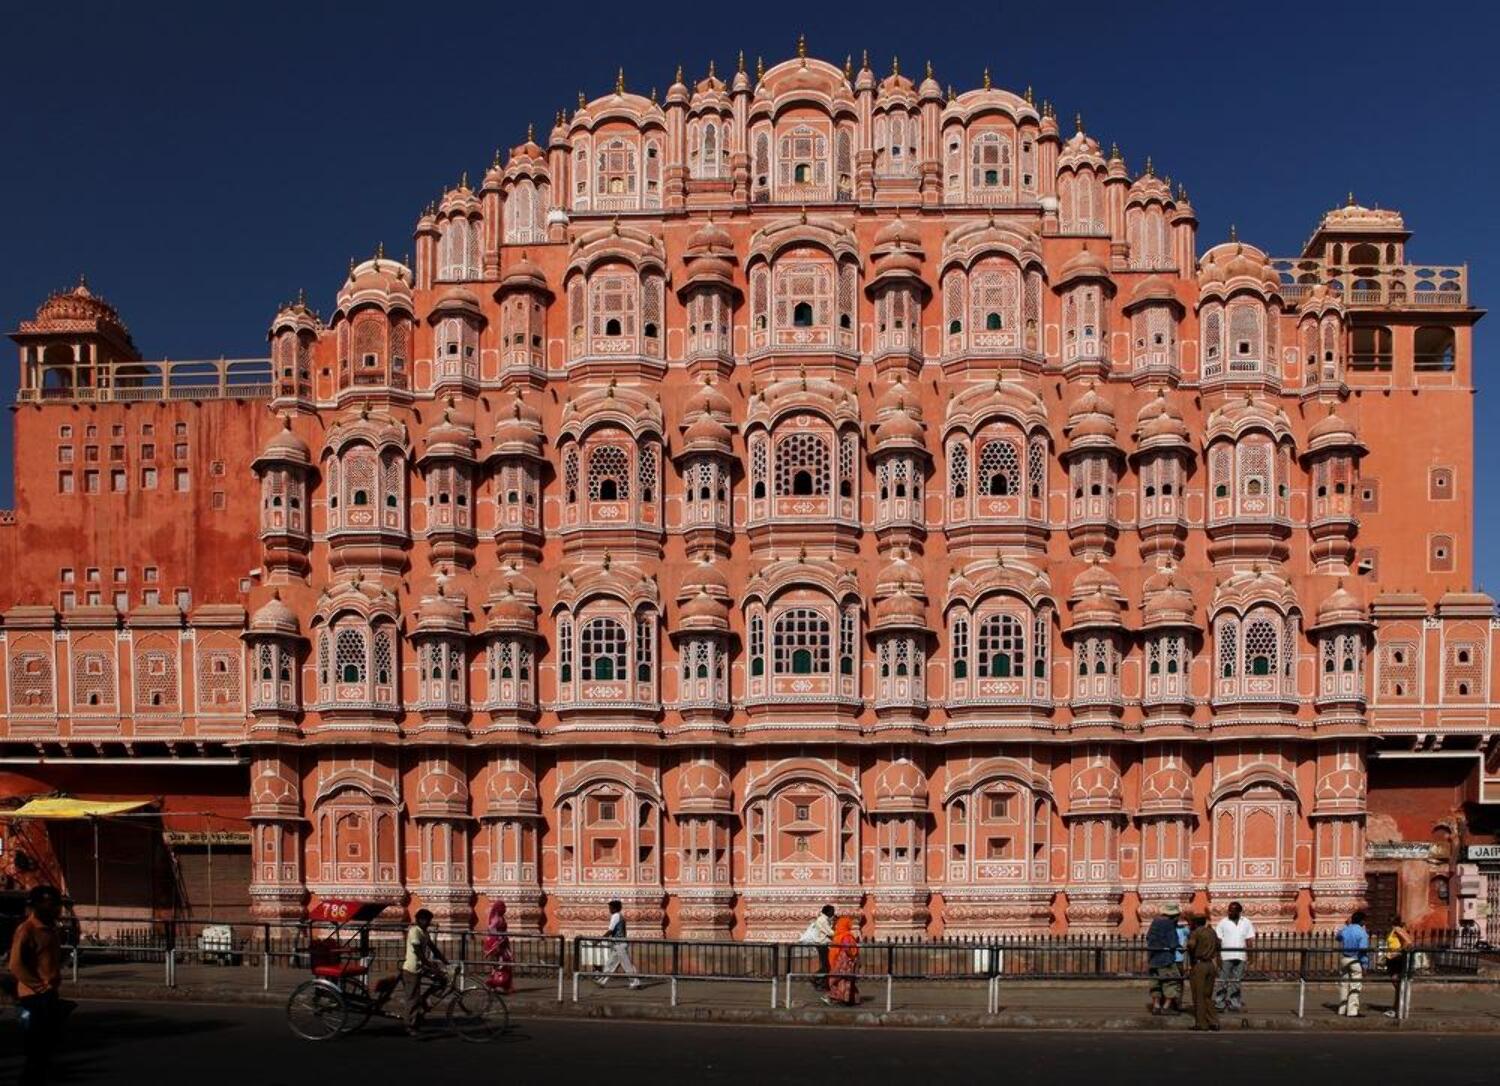 Hawa Mahal Rajasthan1  golden triangle tours  photo 6 from album